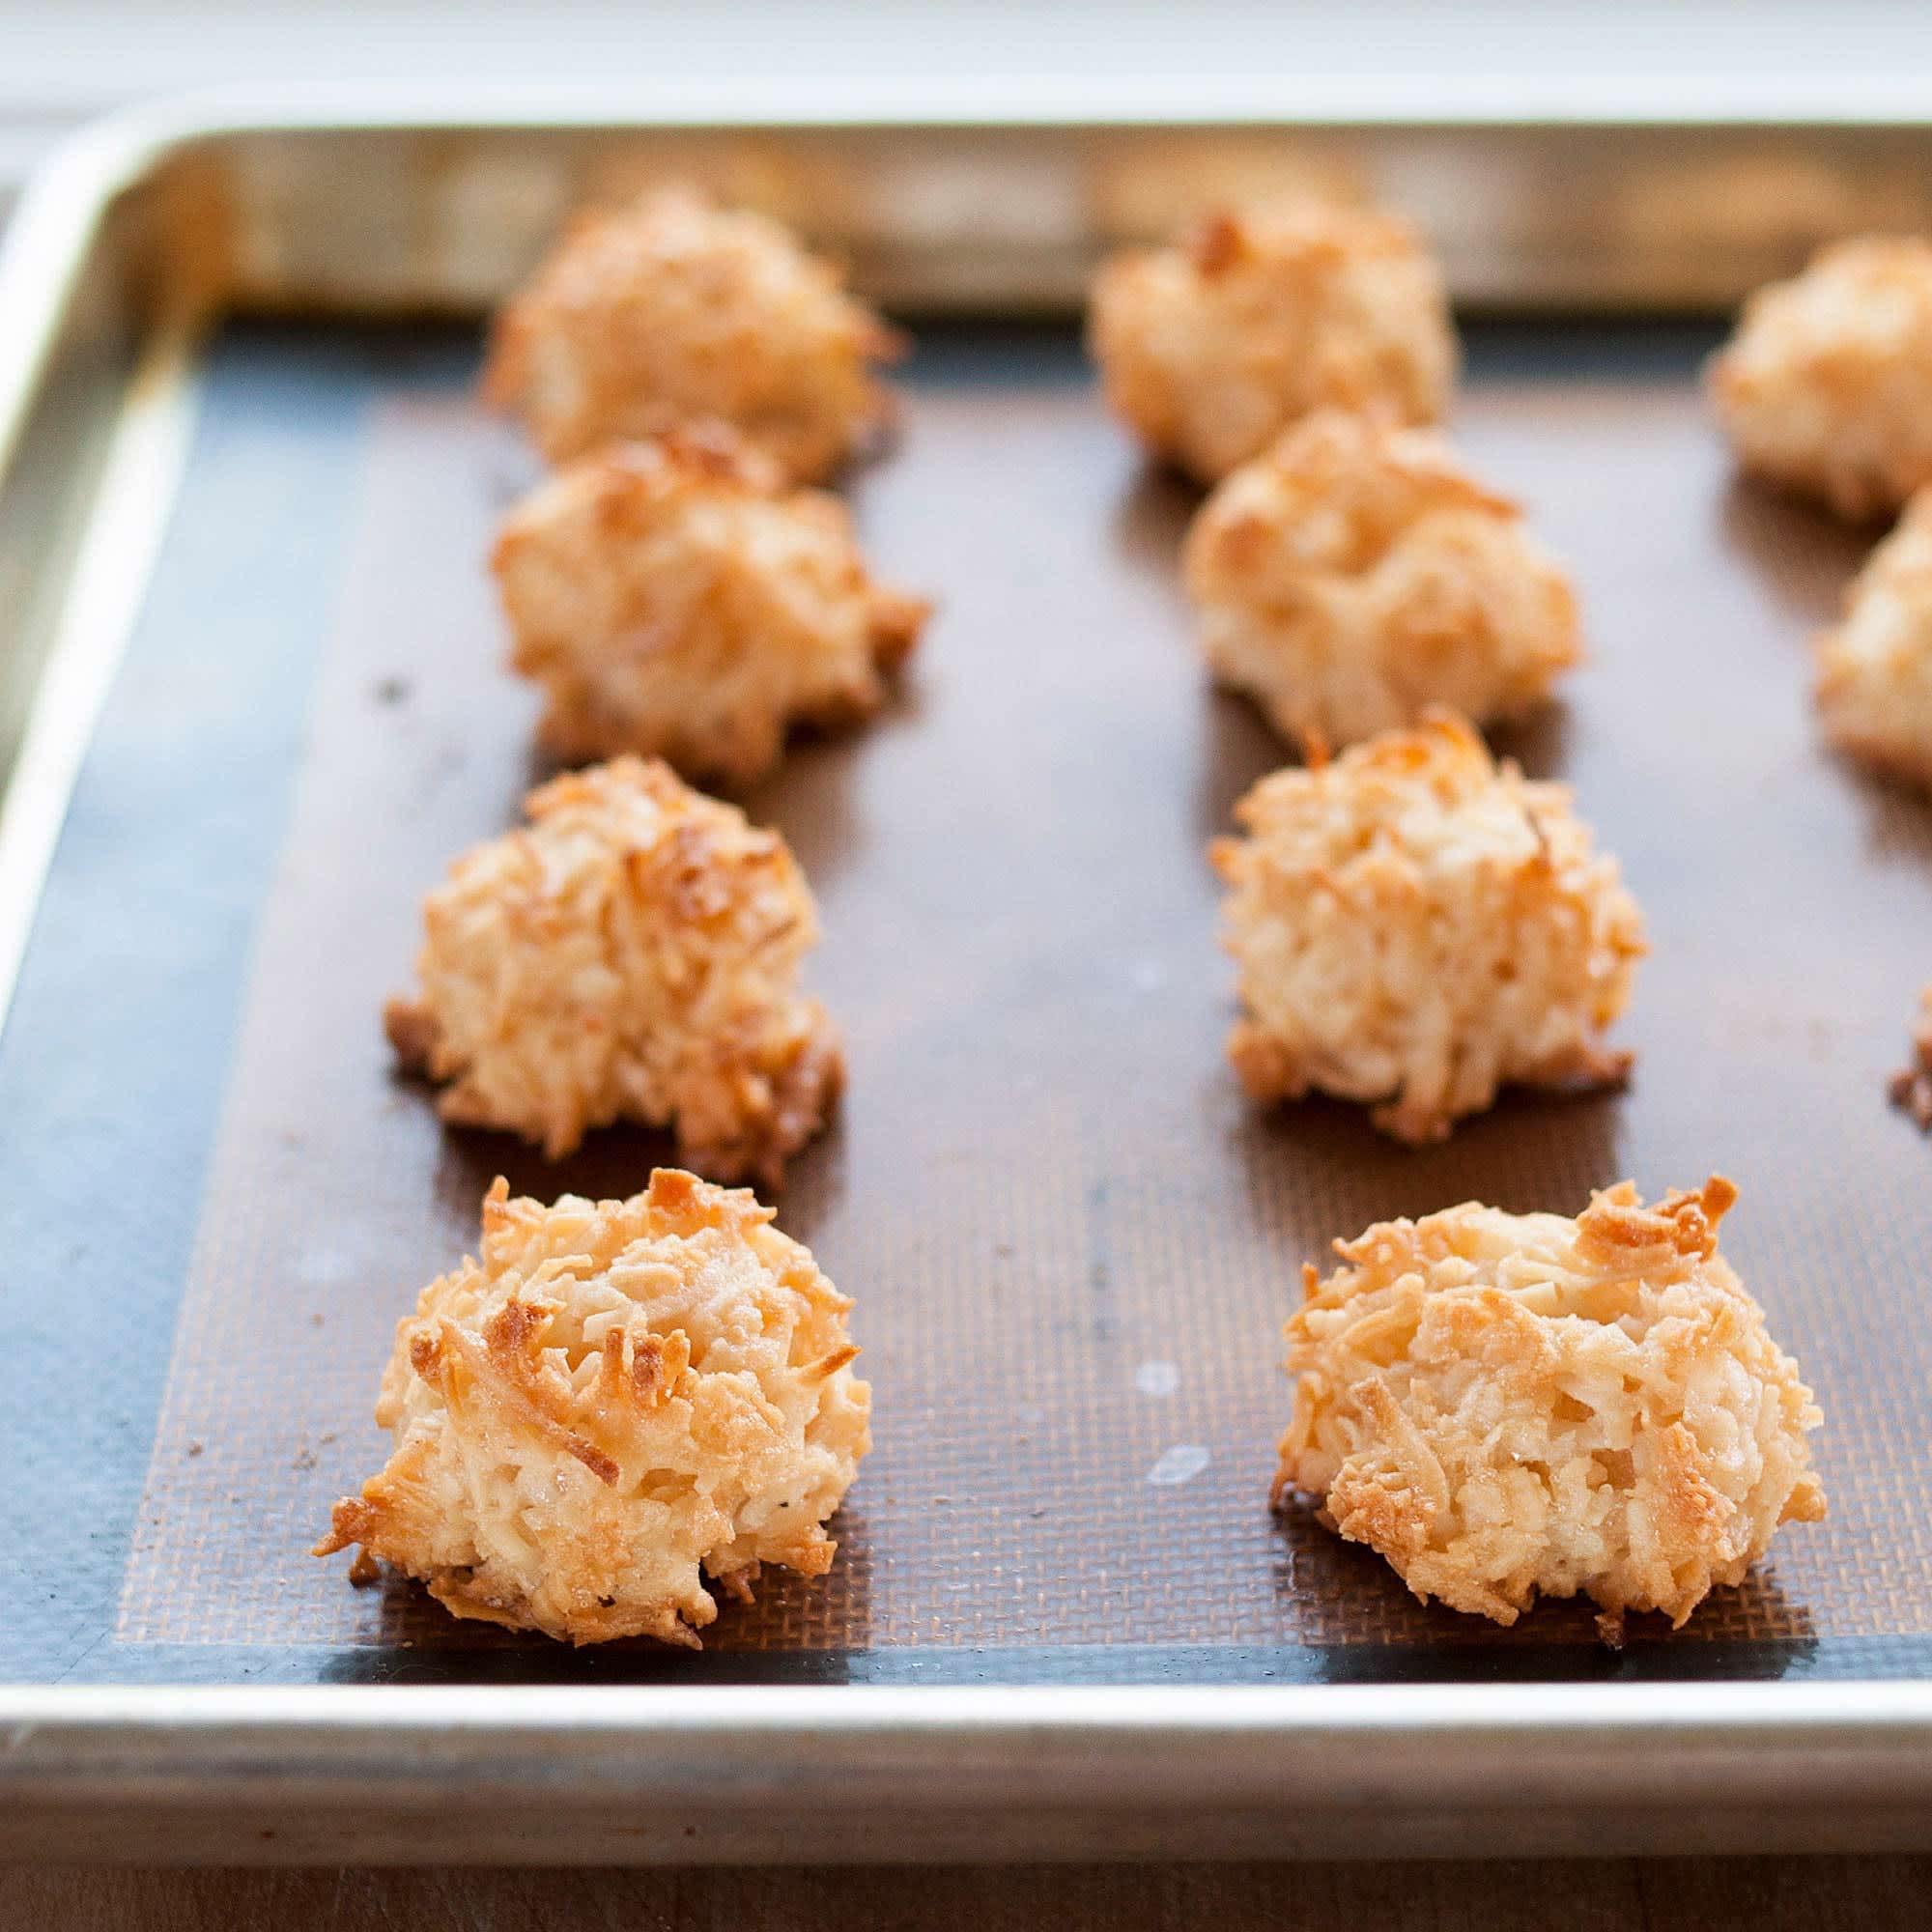 Coconut Macaroons Recipe - How To Make Macaroons | Kitchn